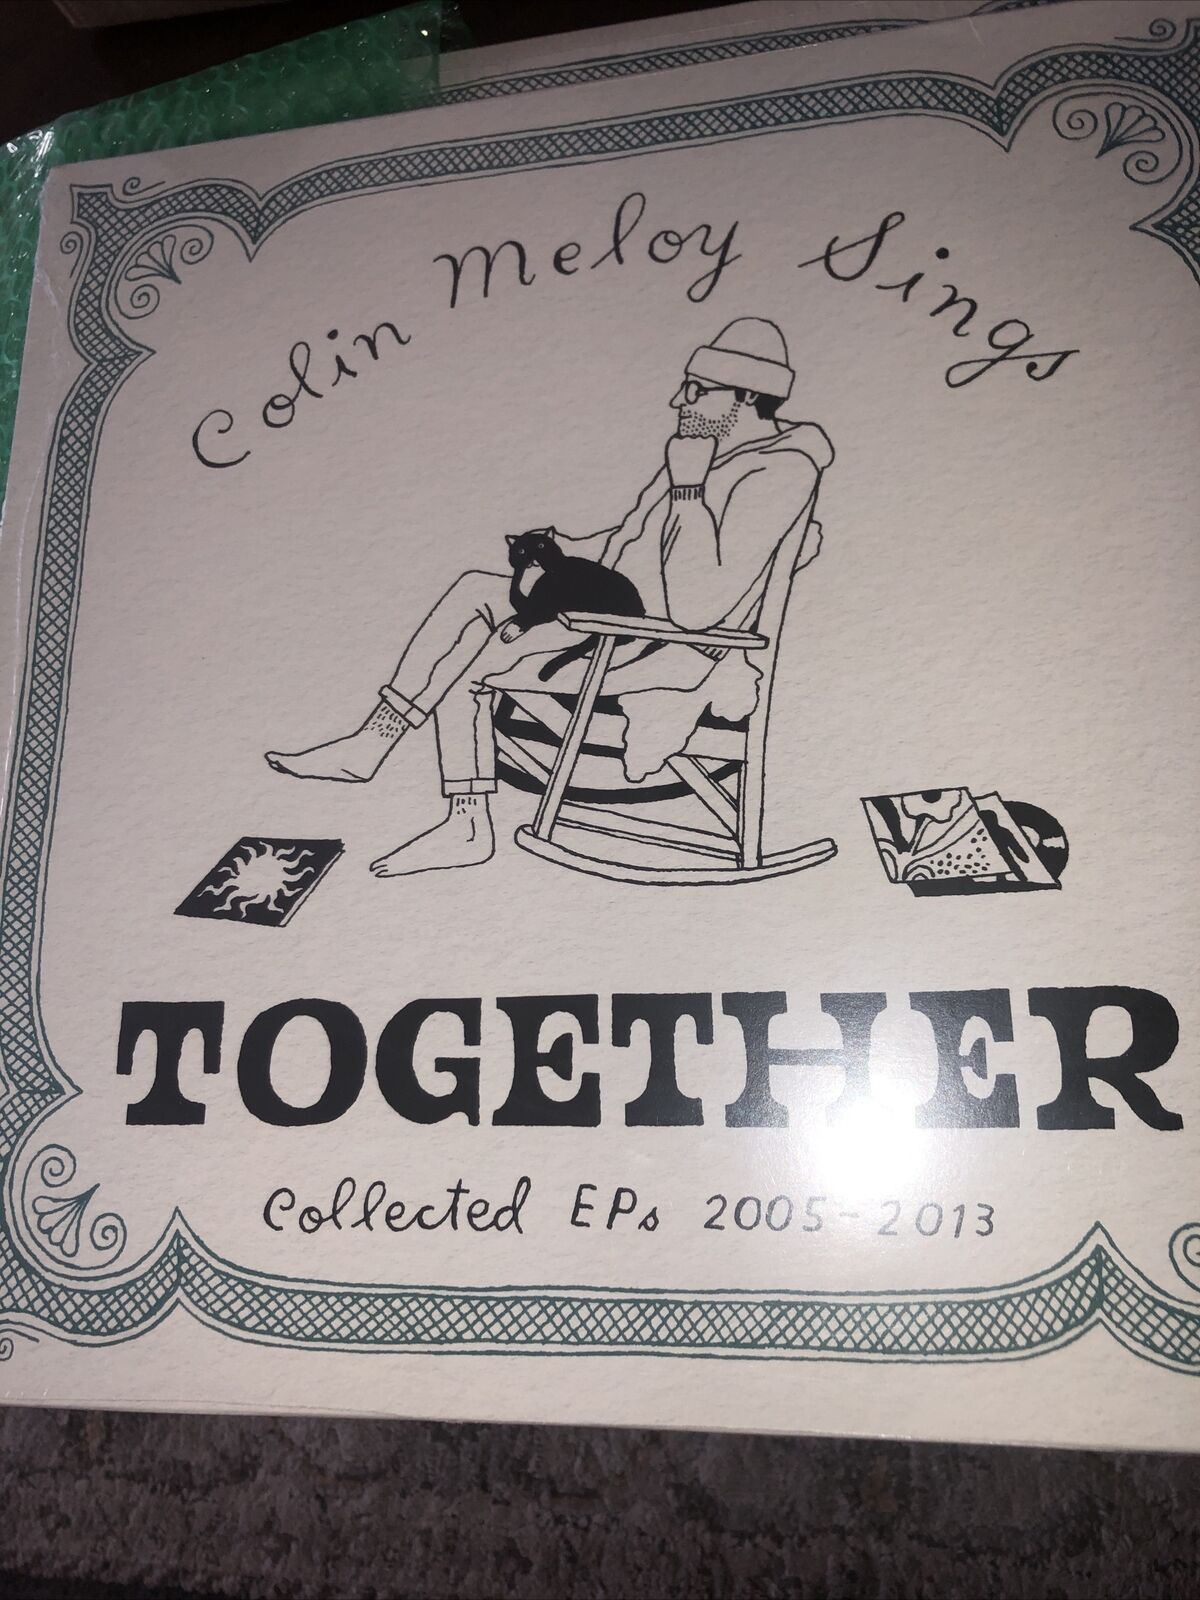 Colin Meloy Sings Together Black Vinyl 2 LP Limited Edition of 500 2005-2013